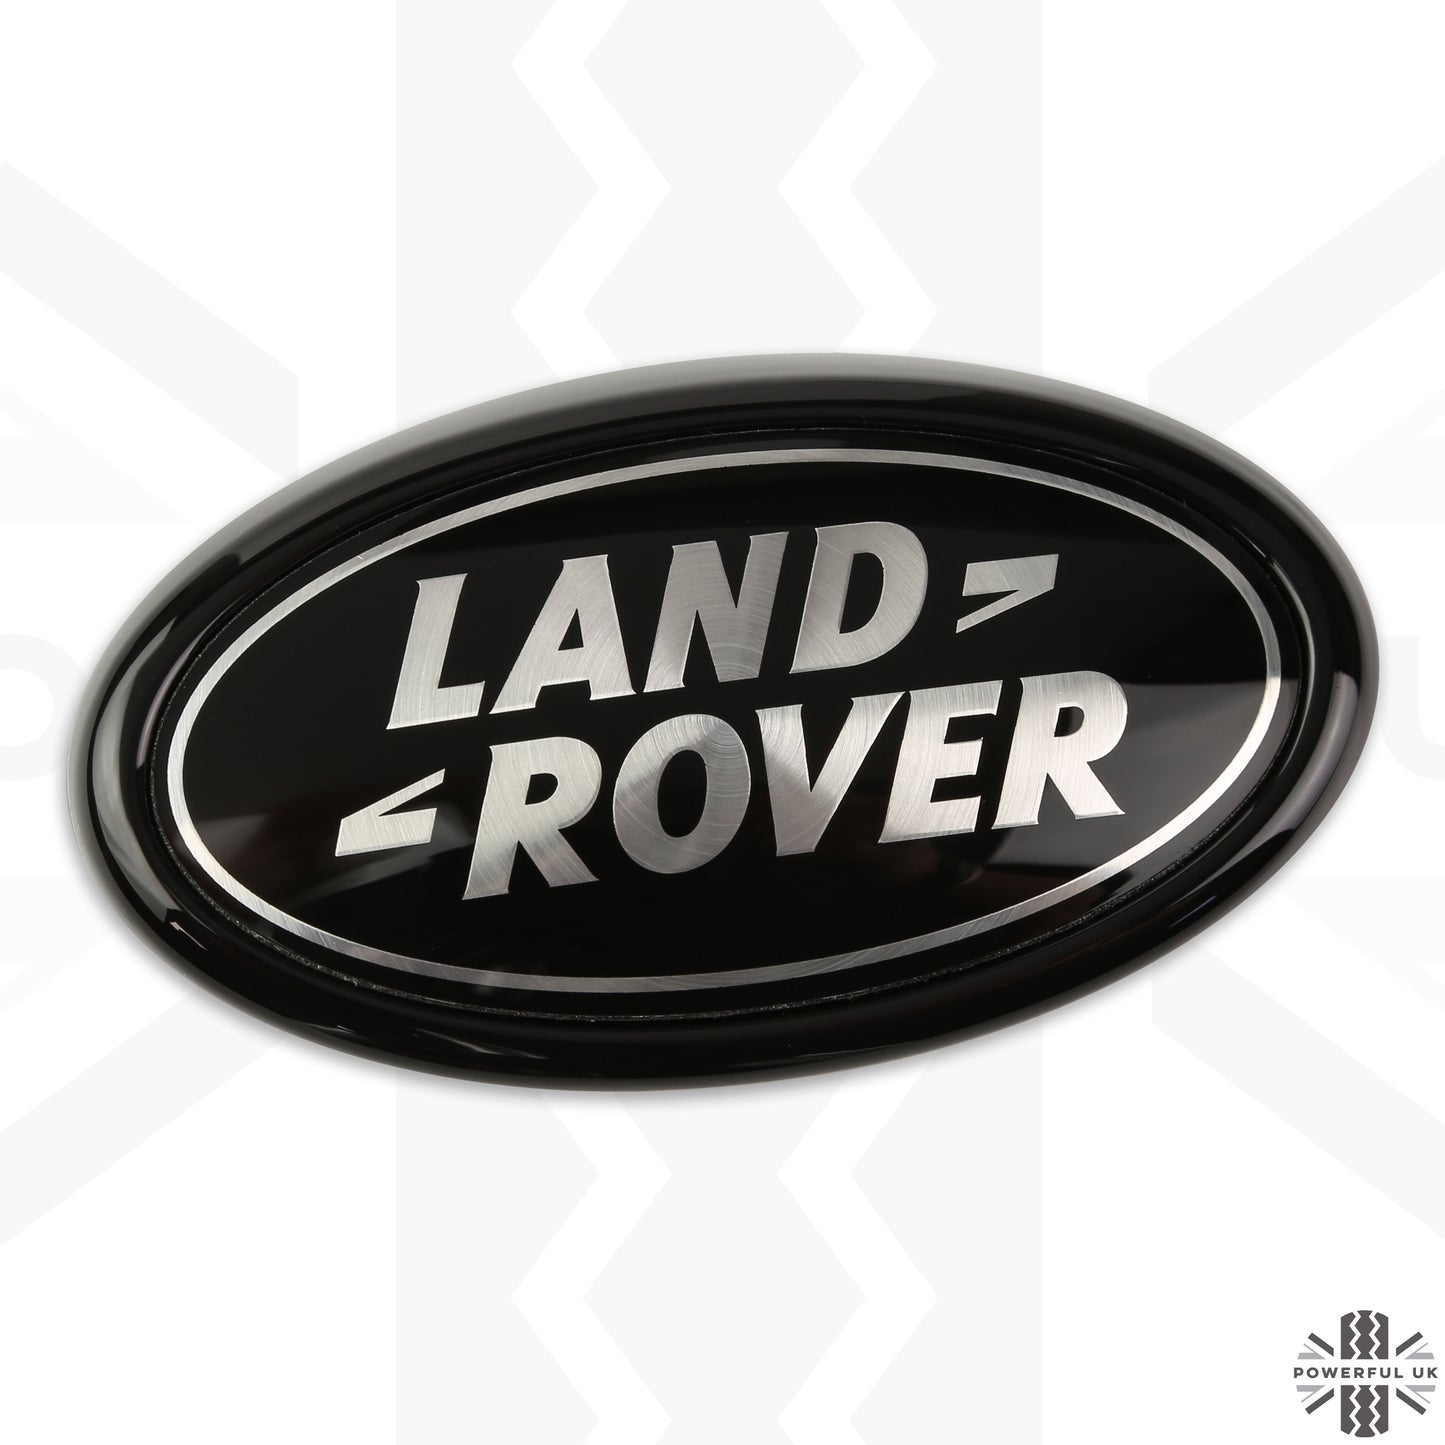 Black & Silver Badge on Gloss Black Sloped Plinth for Land Rover Discovery 5